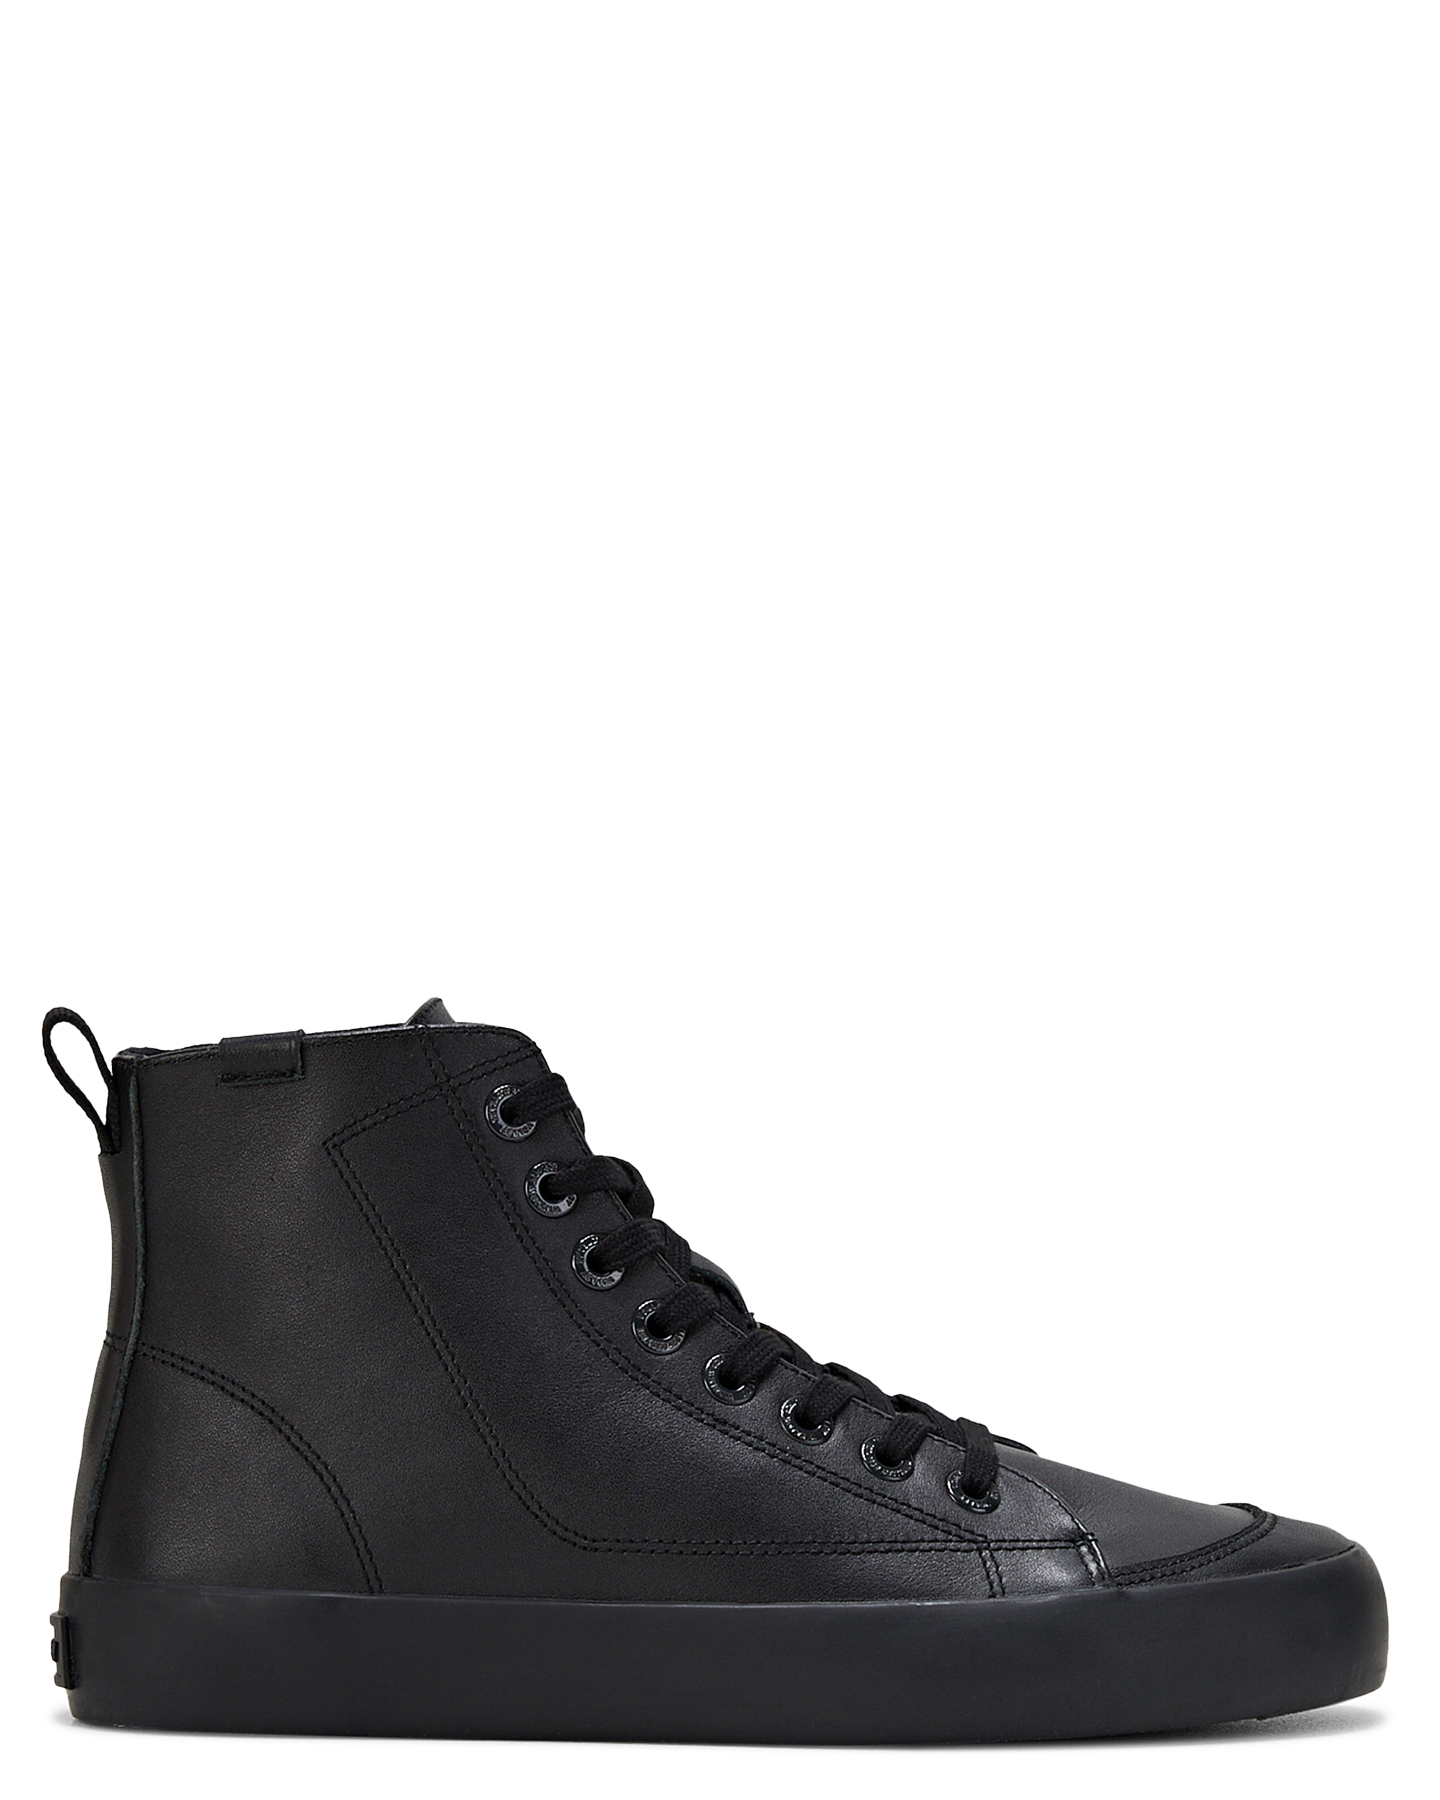 Volley Mens Deuce Leather High Shoe - Black Leather | SurfStitch